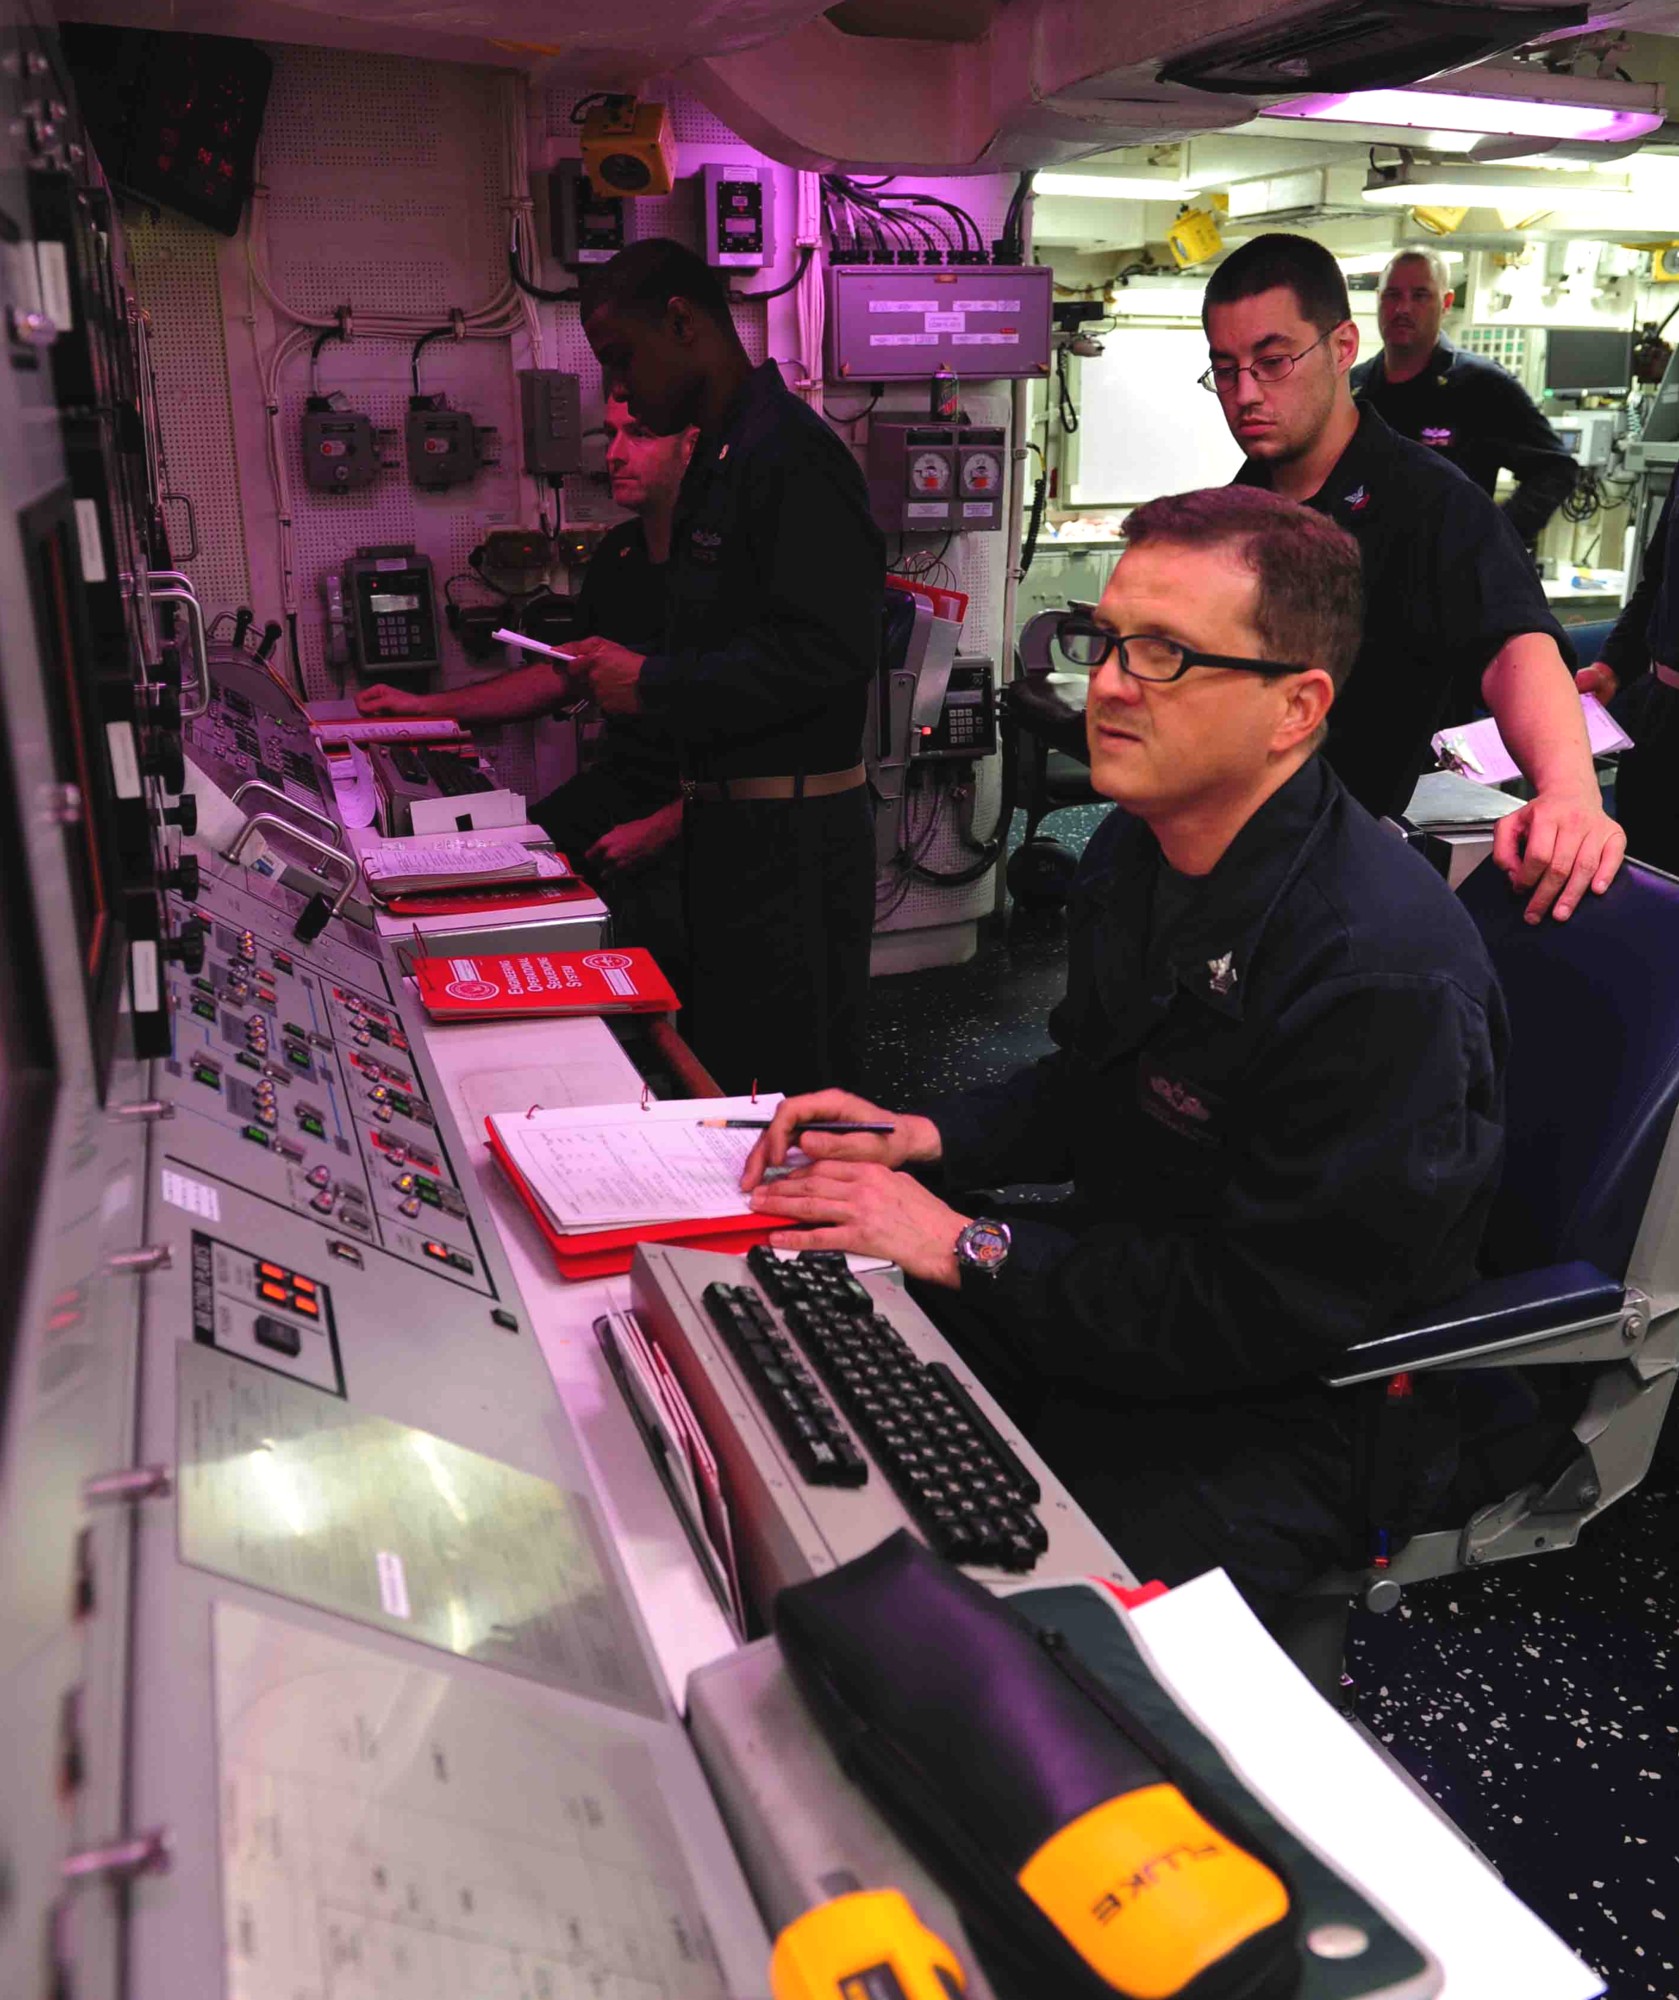 ddg-81 uss winston s. churchill arleigh burke class guided missile destroyer aegis 19 central control station